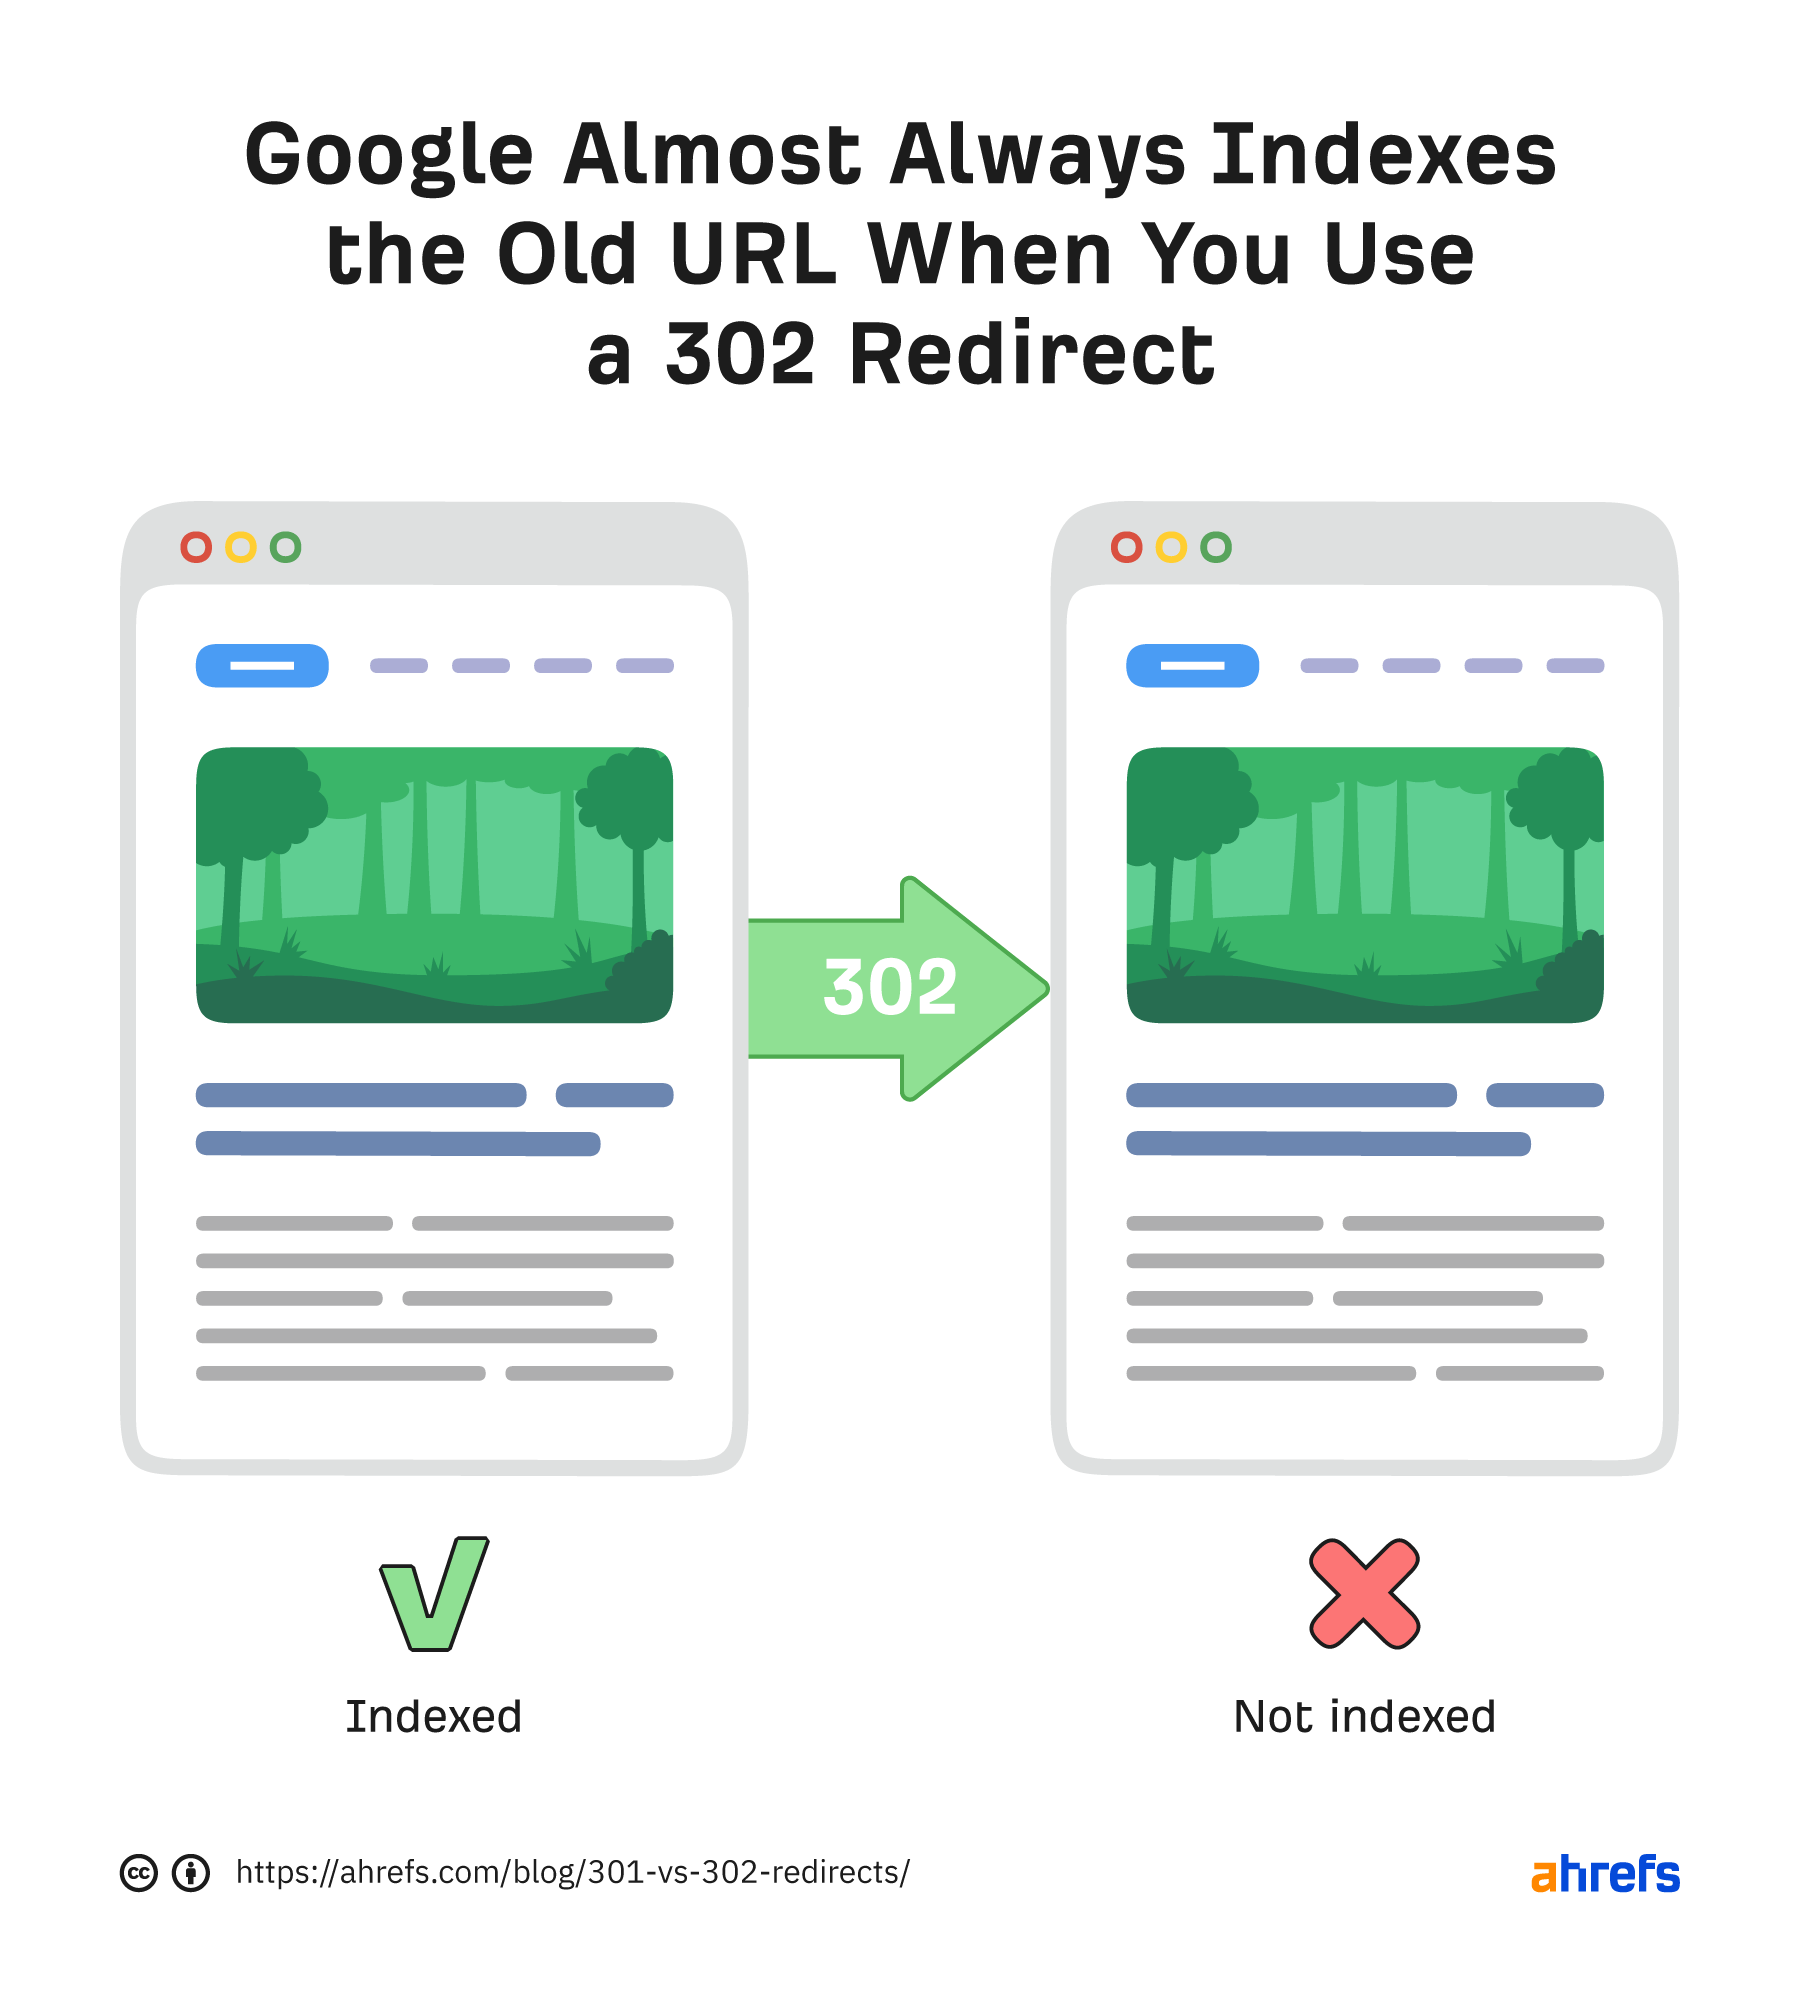 Google almost always indexes the old URL when you use a 302 redirect